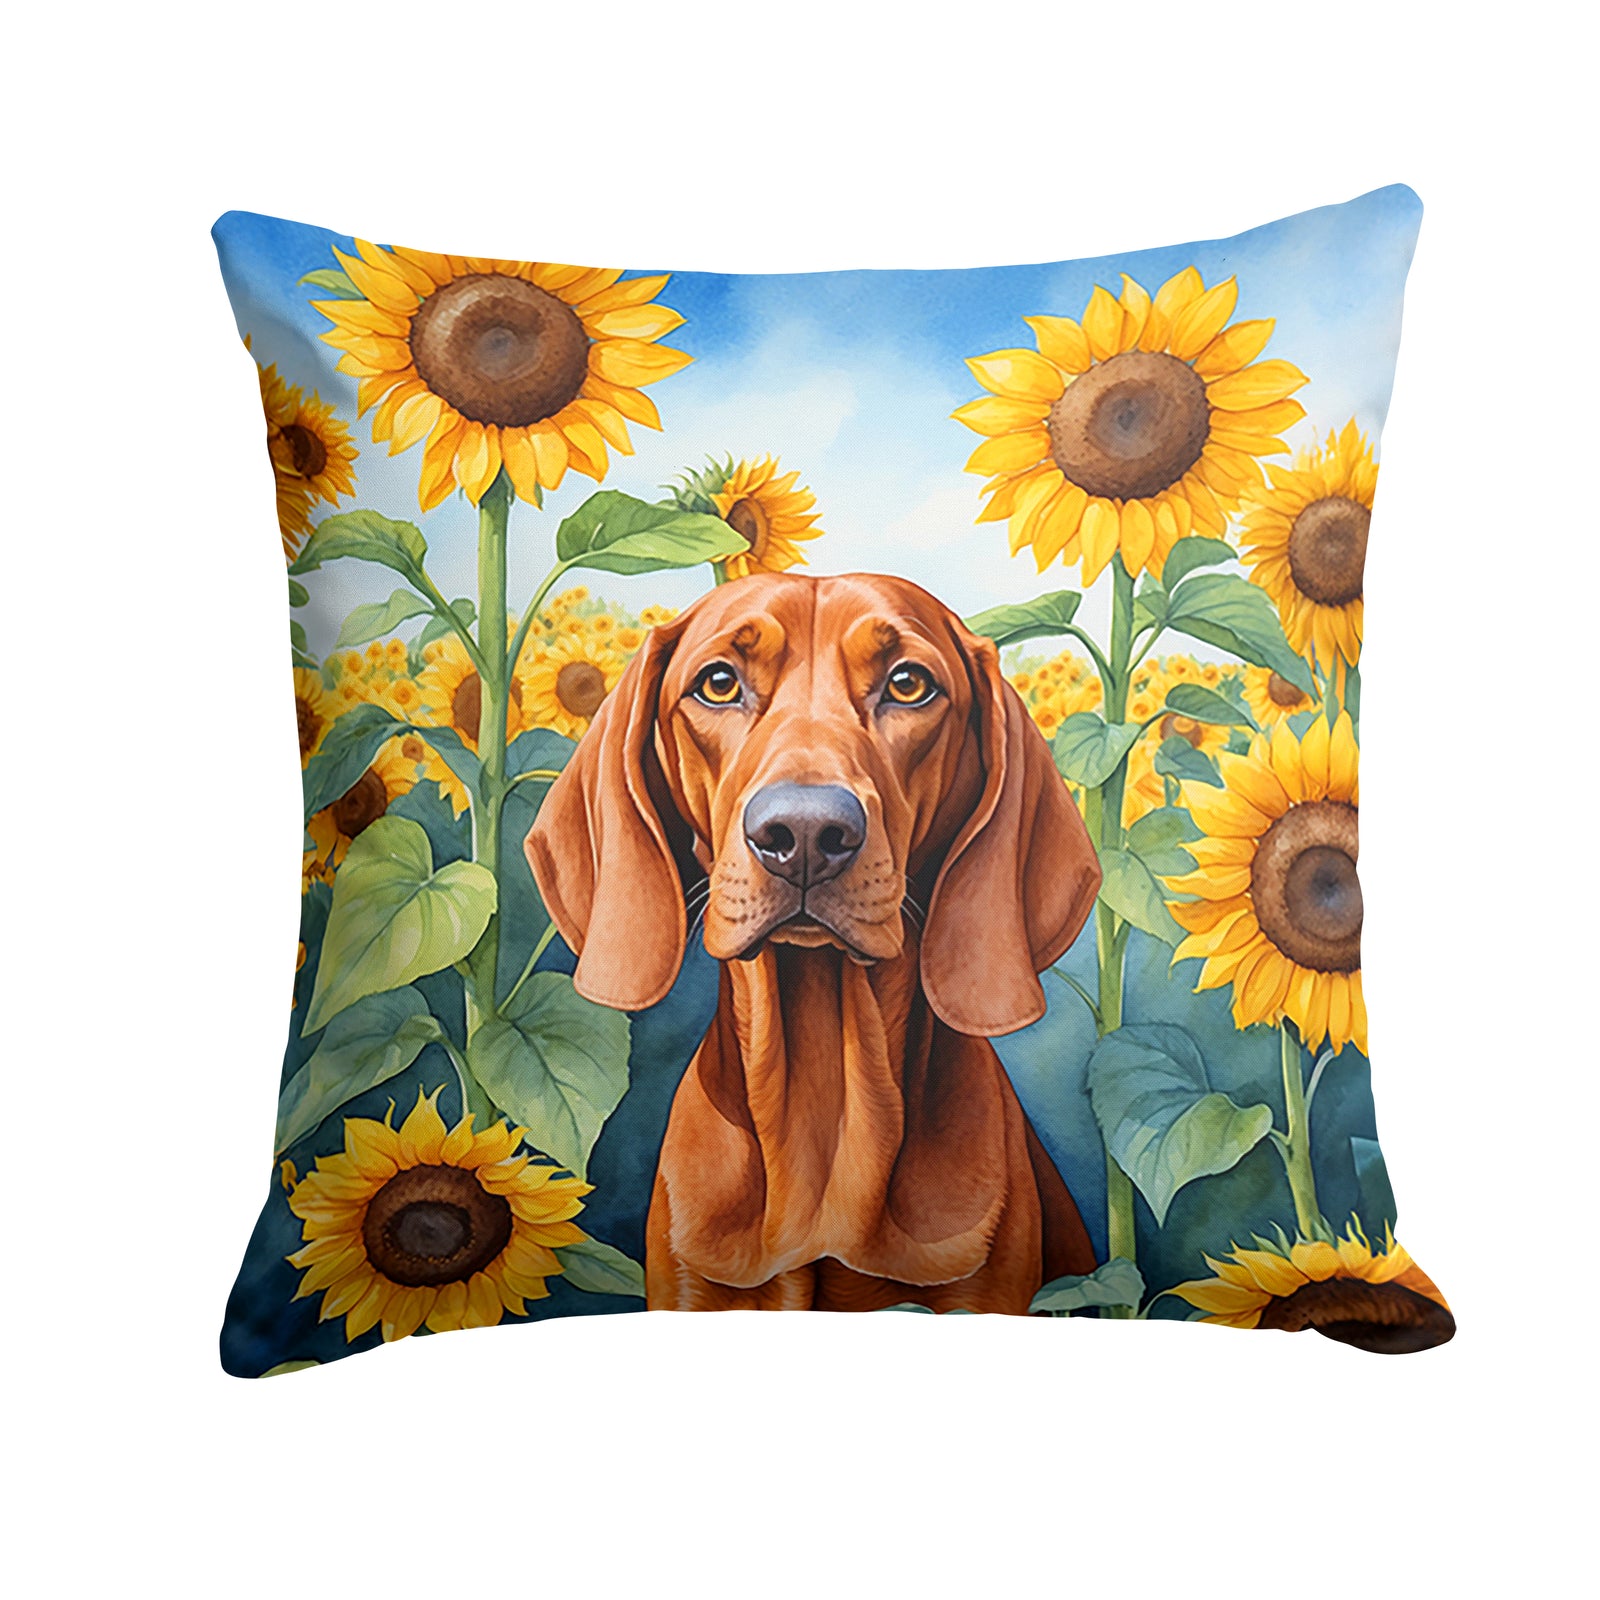 Buy this Redbone Coonhound in Sunflowers Throw Pillow